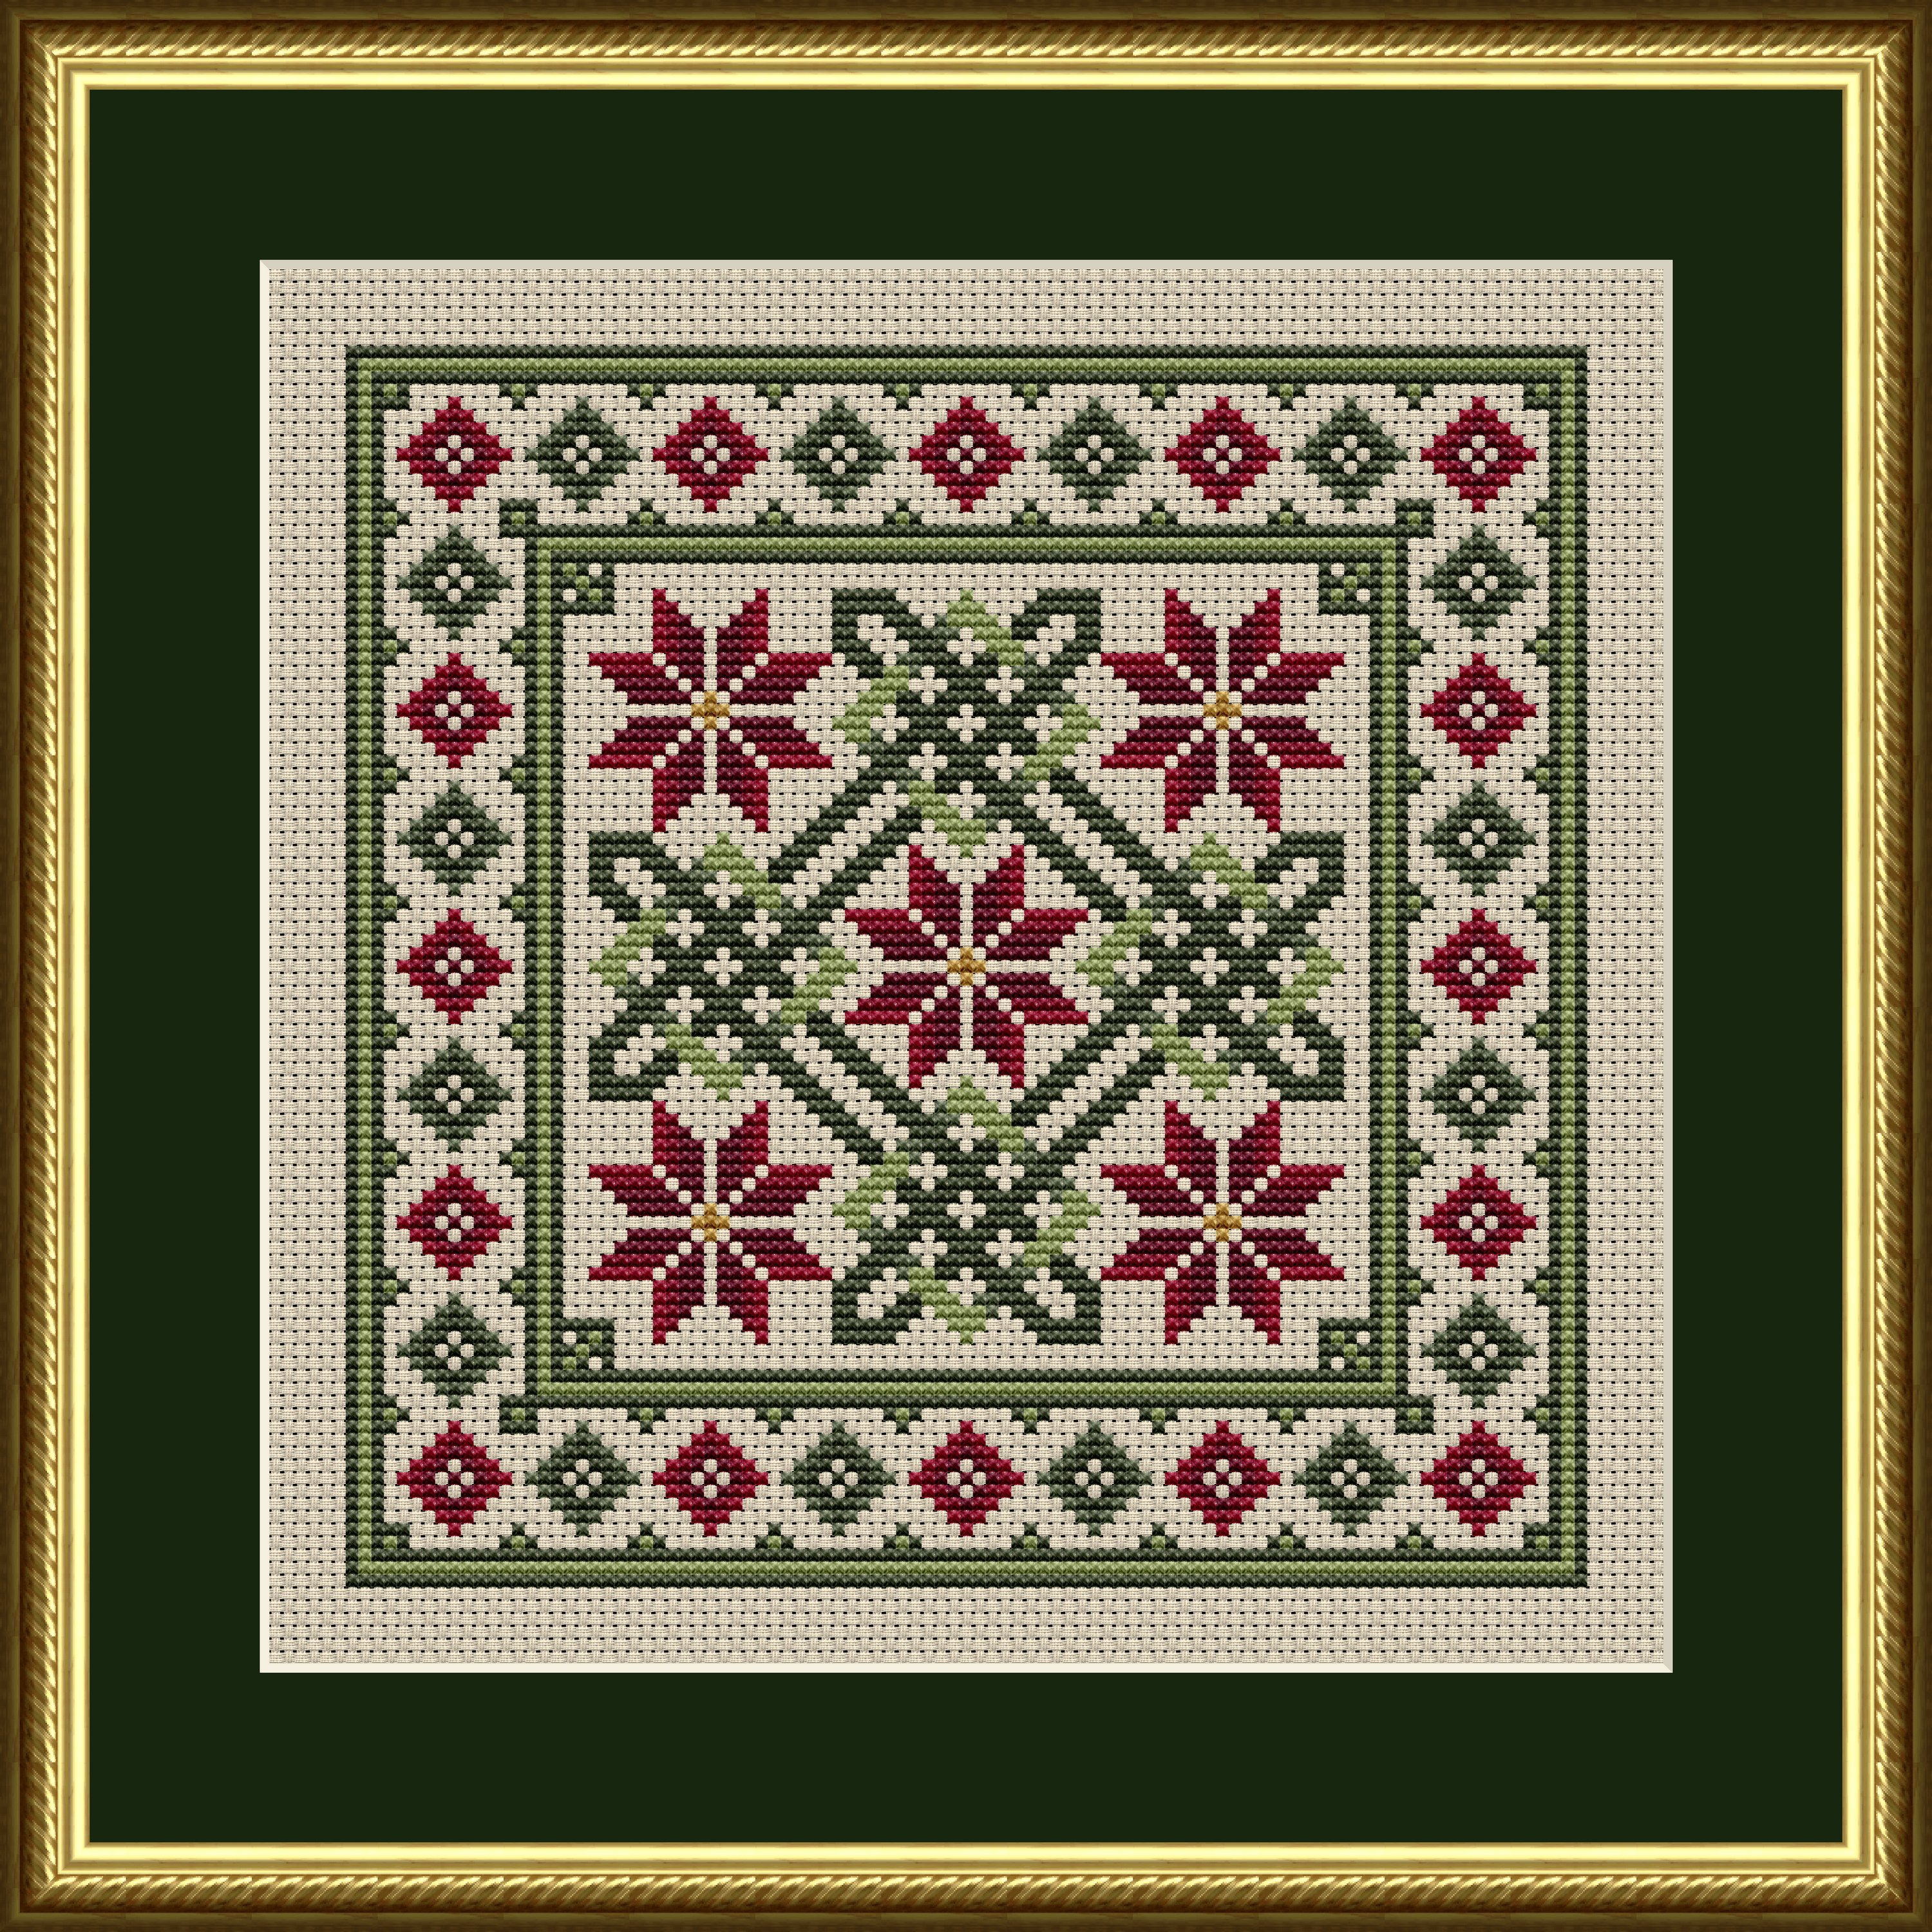 Celtic Poinsettias for Christmas Knot Work Cross Stitch Pattern 1154